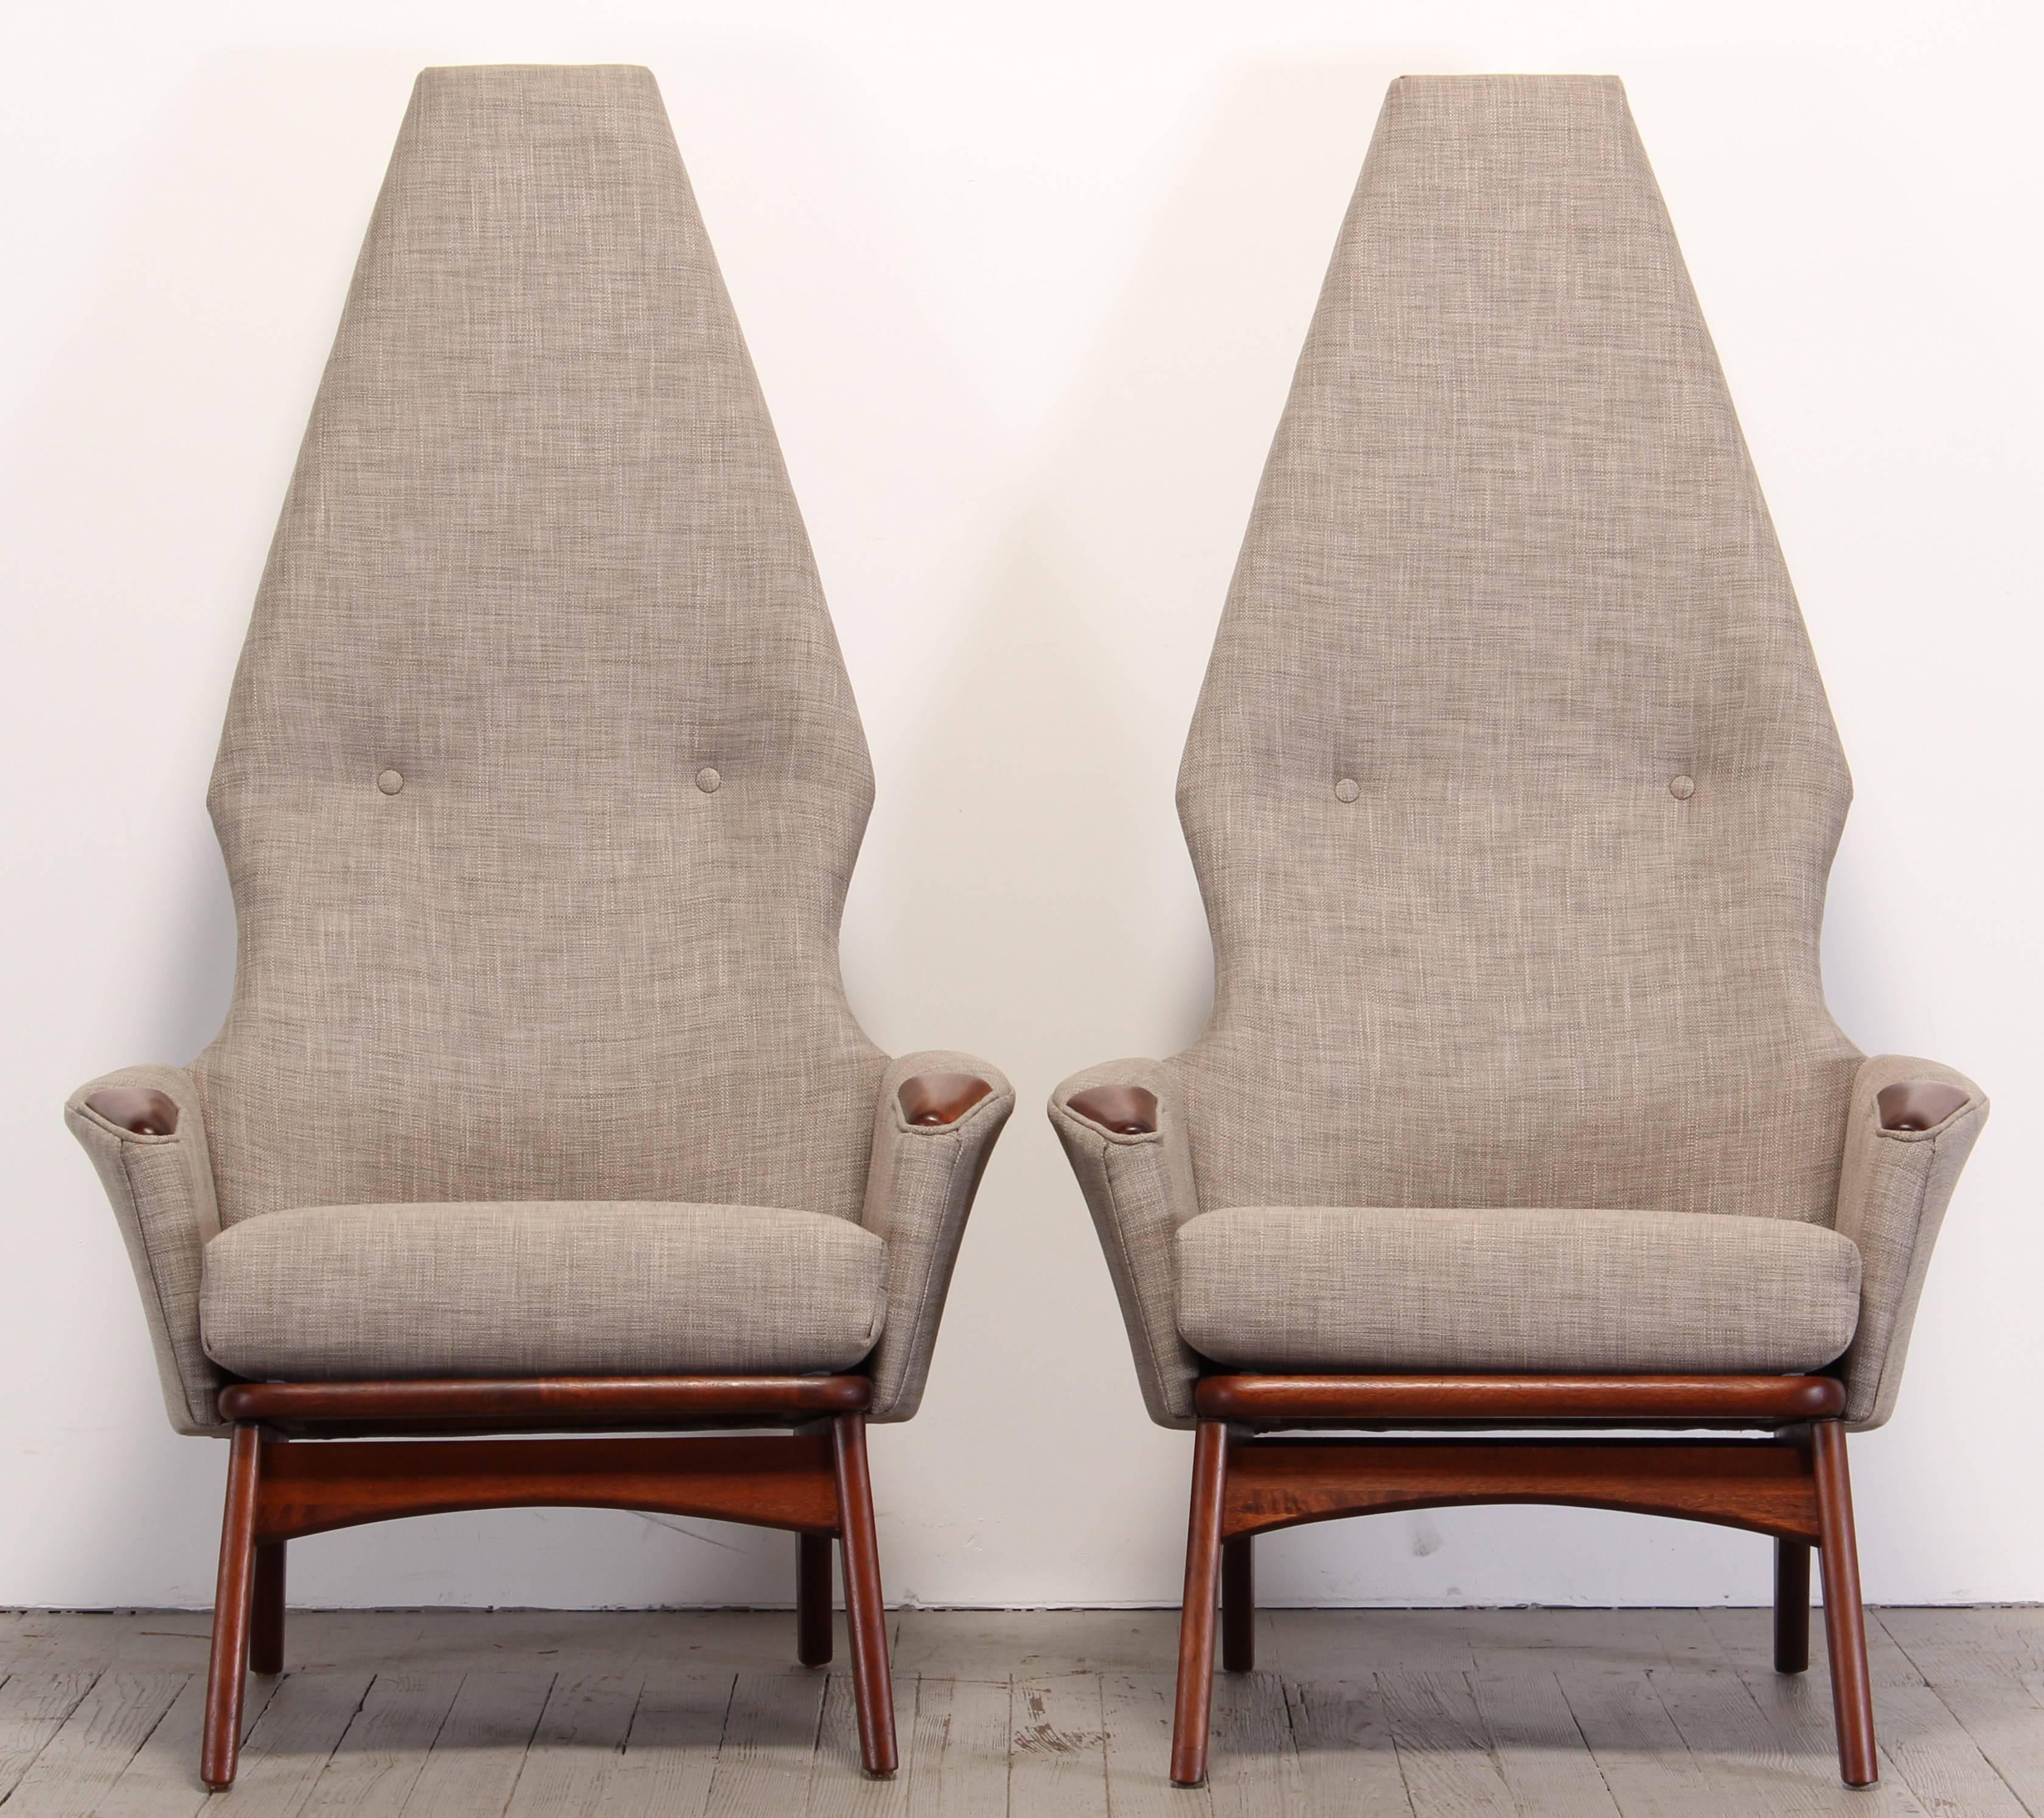 American Adrian Pearsall Pair of Walnut Chairs for Craft Associates Model #2056-C, 1960